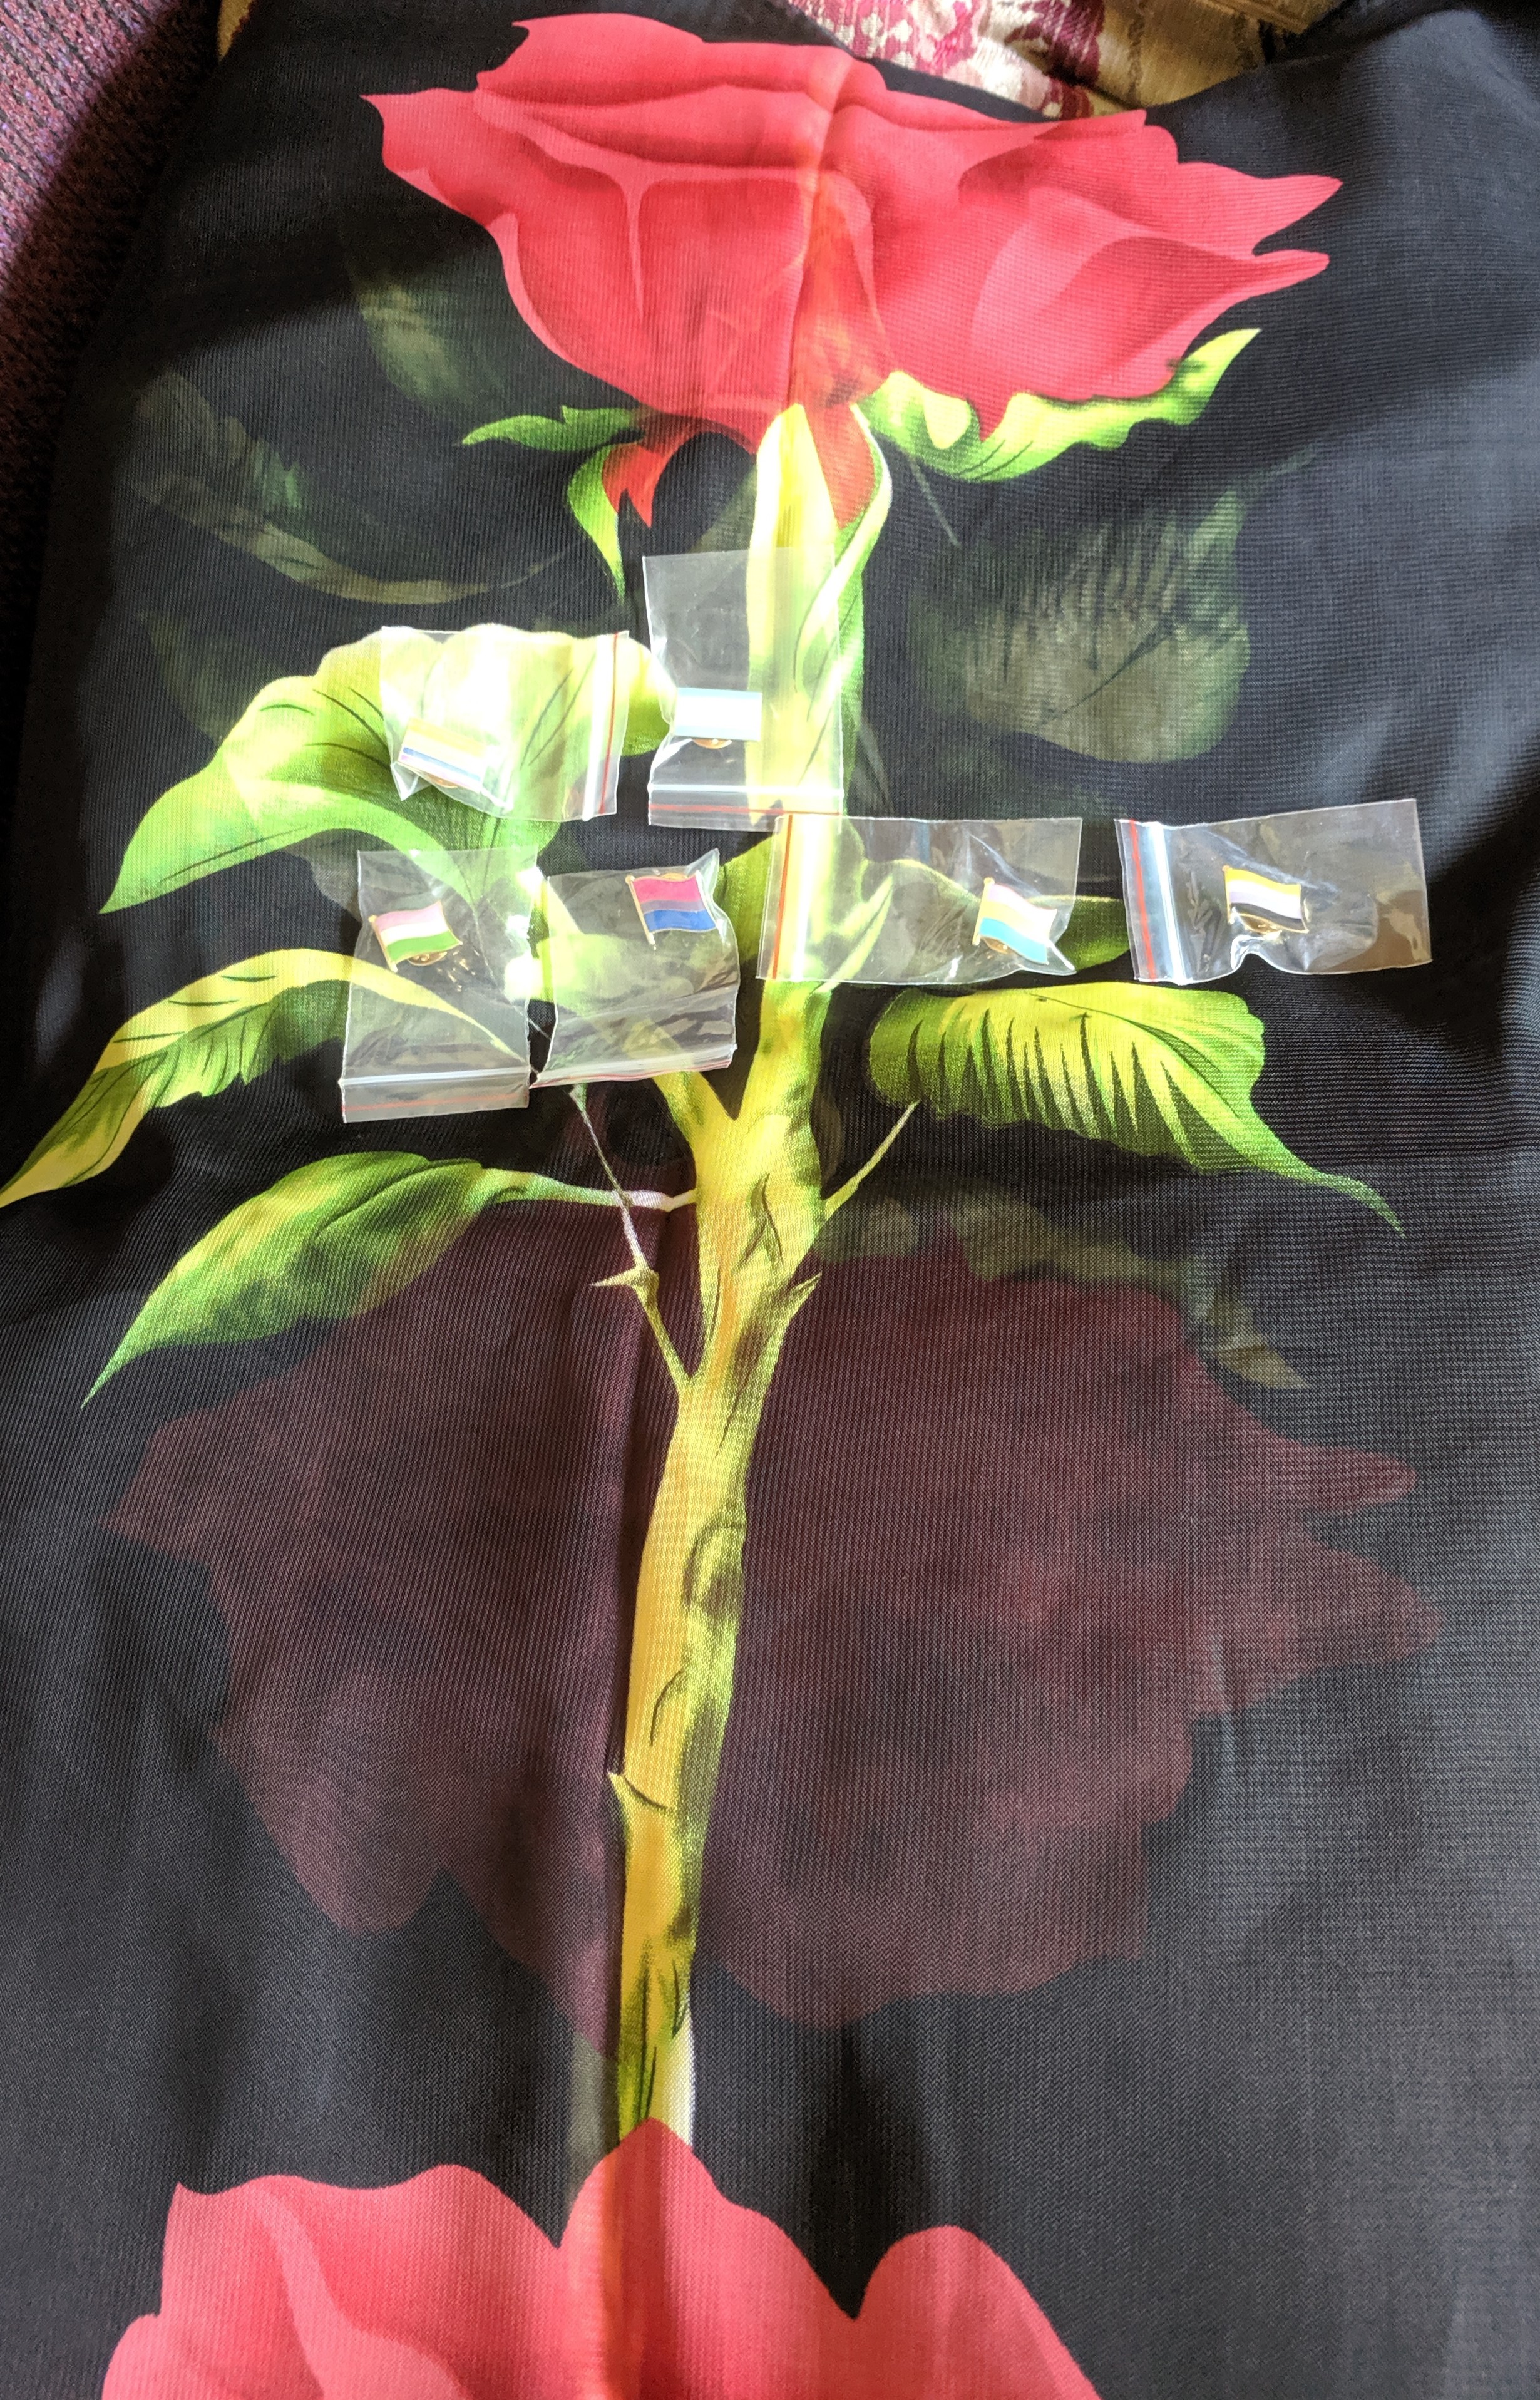 A black diaphanous scarf laid out vertically. A red rose with thorns is printed on it